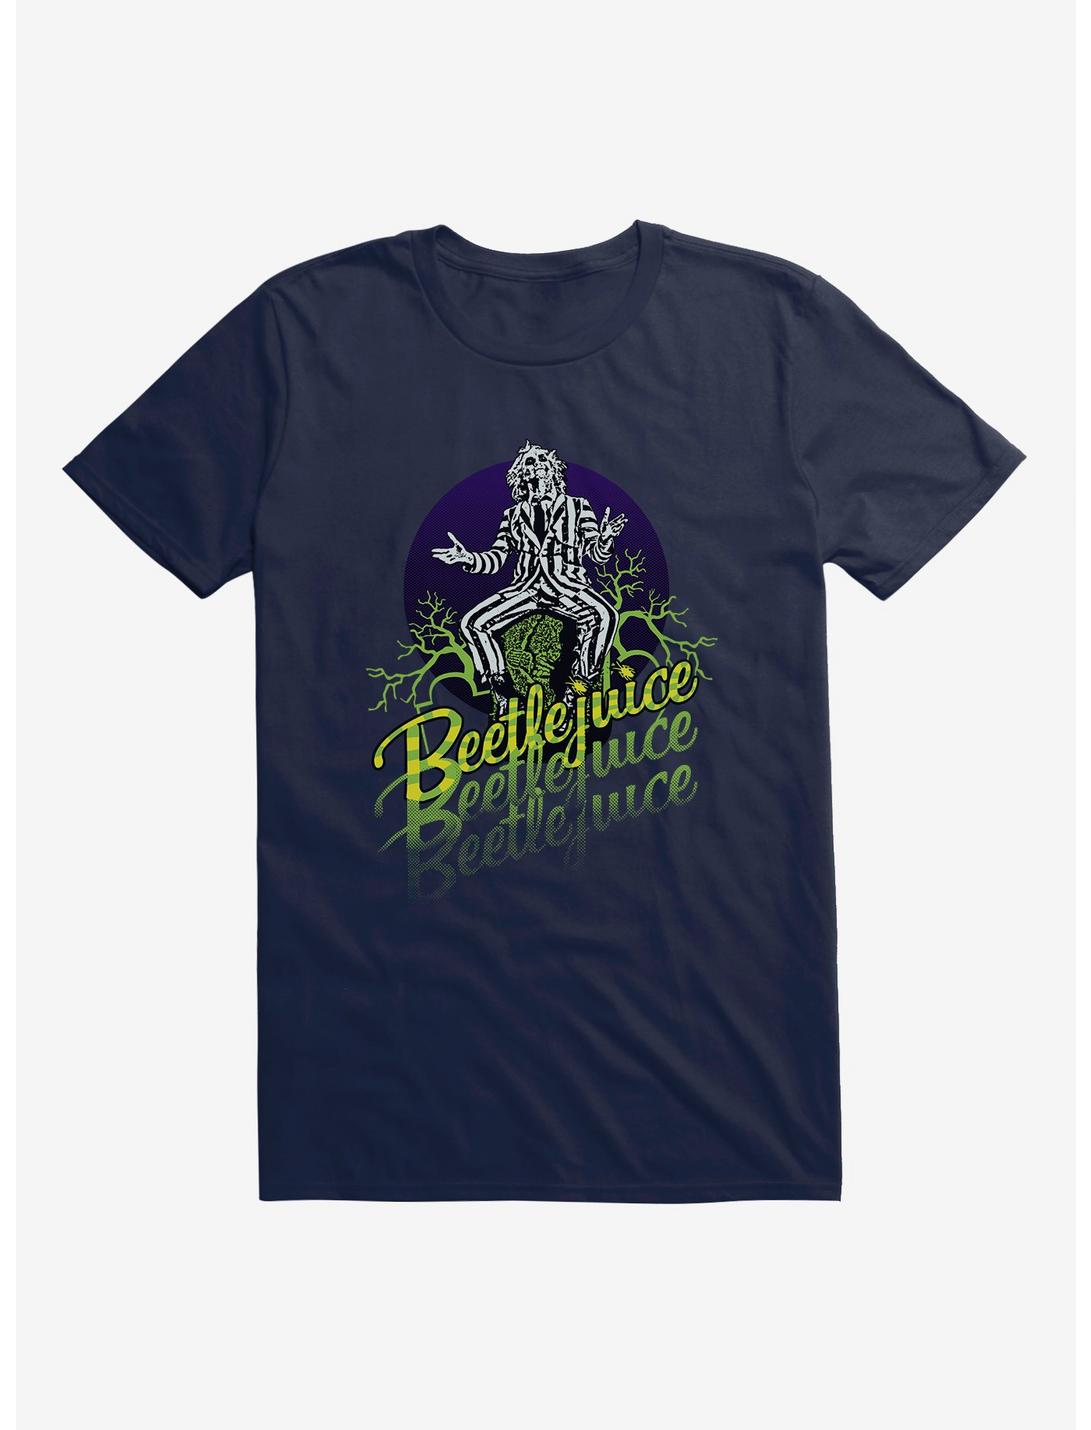 Beetlejuice Branches T-Shirt, MIDNIGHT NAVY, hi-res